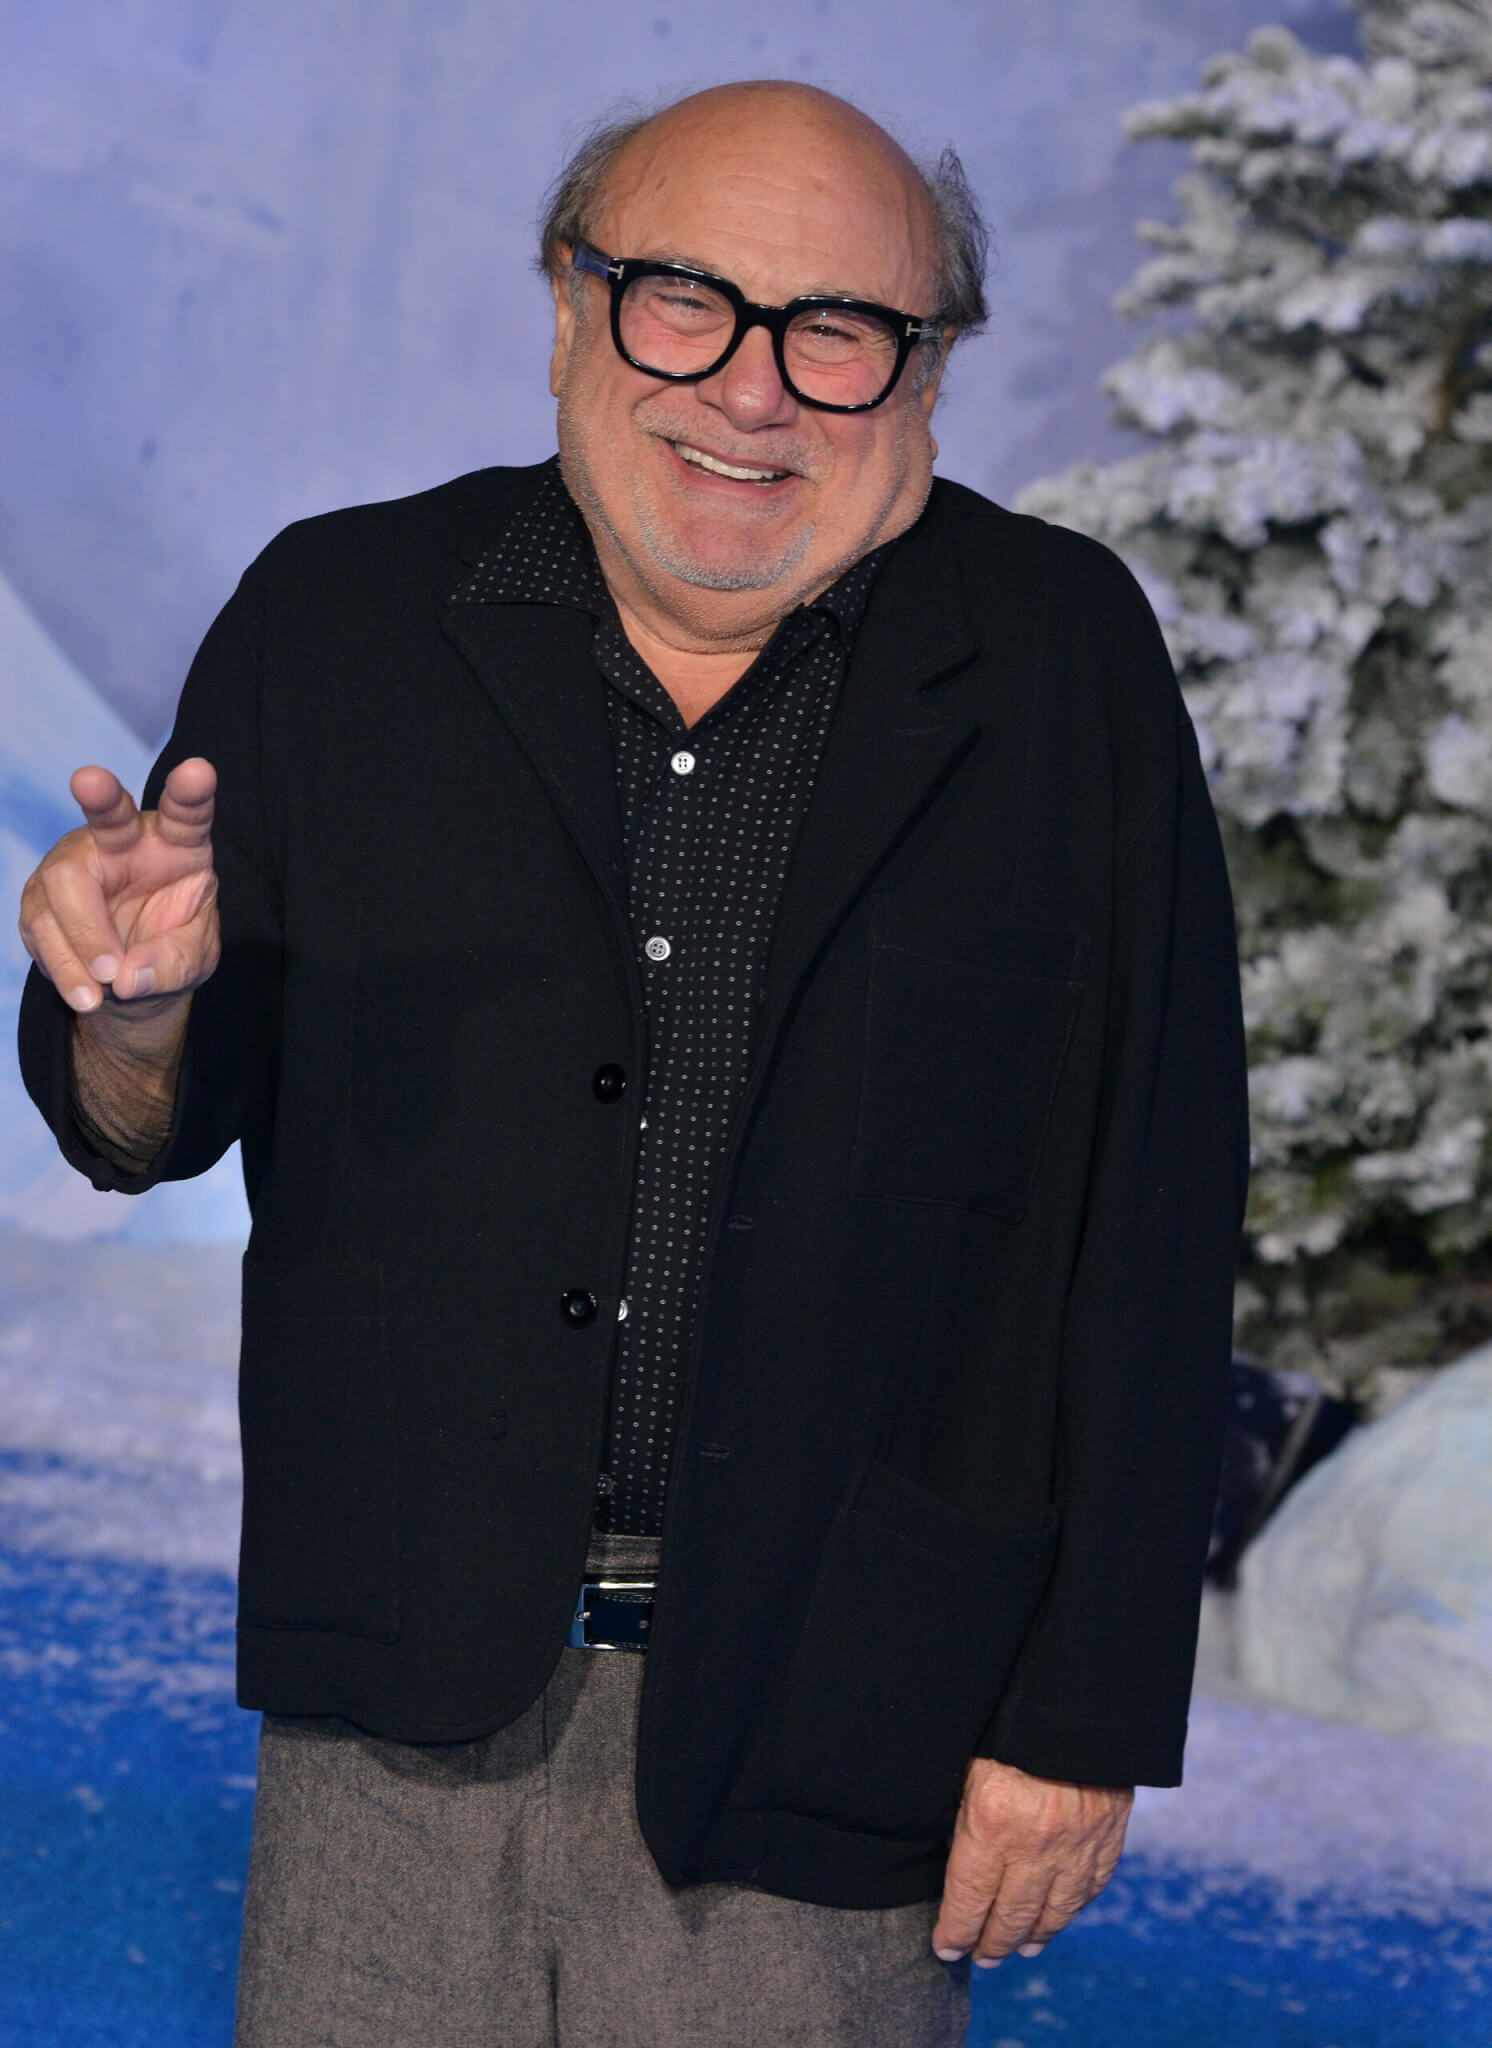 DeVito attends the premiere of Sony Pictures' "Jumanji: The Next Level" in 2019 